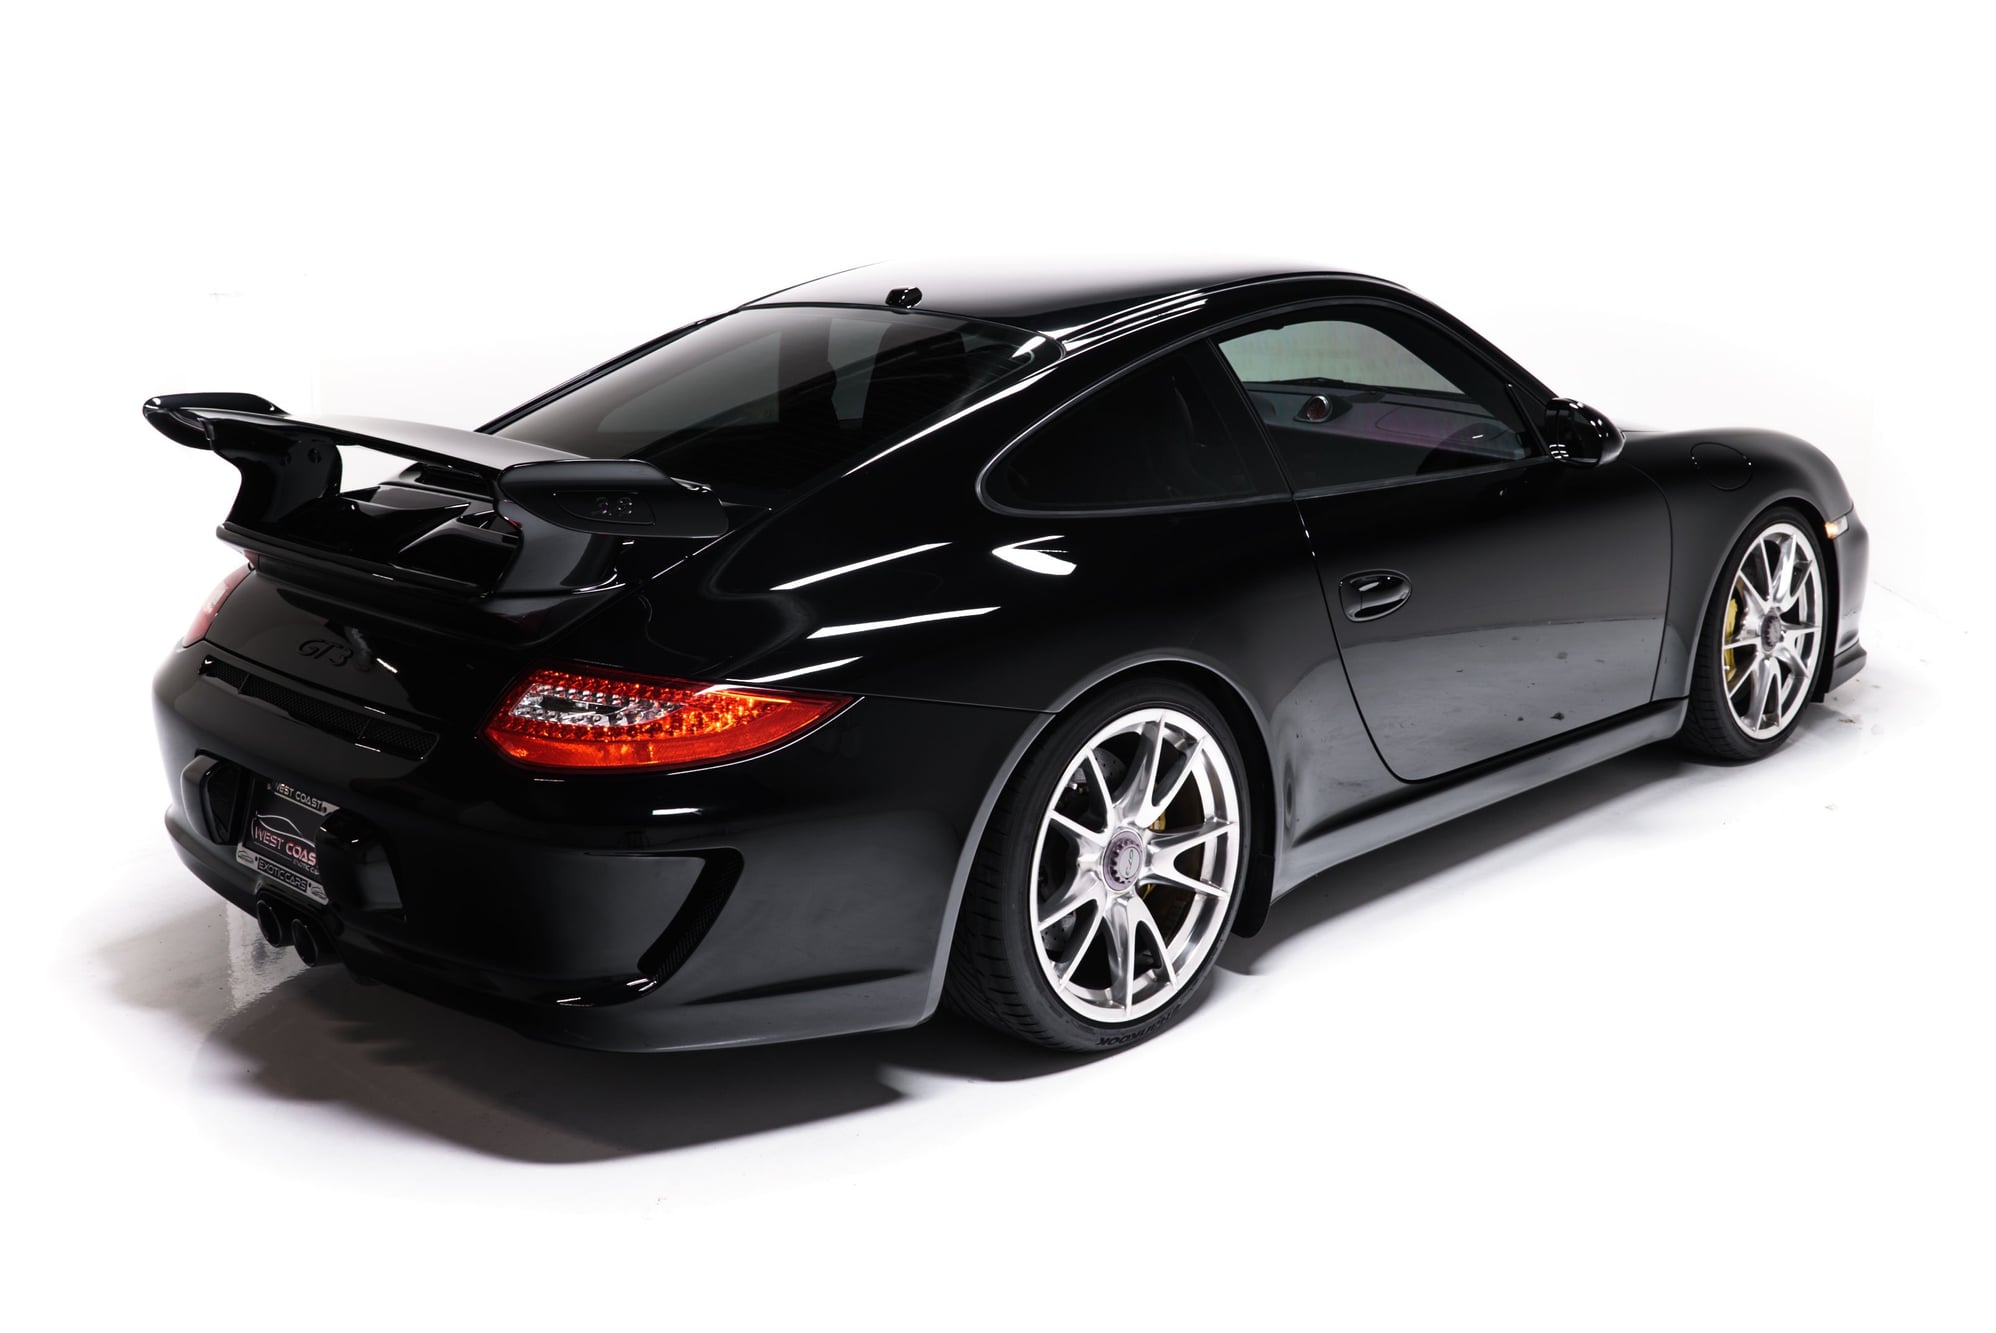 2010 Porsche GT3 - 2010 Porsche 911 GT3 w/ CCB's - Used - VIN WP0AC2A90AS783511 - 29,074 Miles - 6 cyl - 2WD - Manual - Coupe - Black - Murrieta, CA 92562, United States